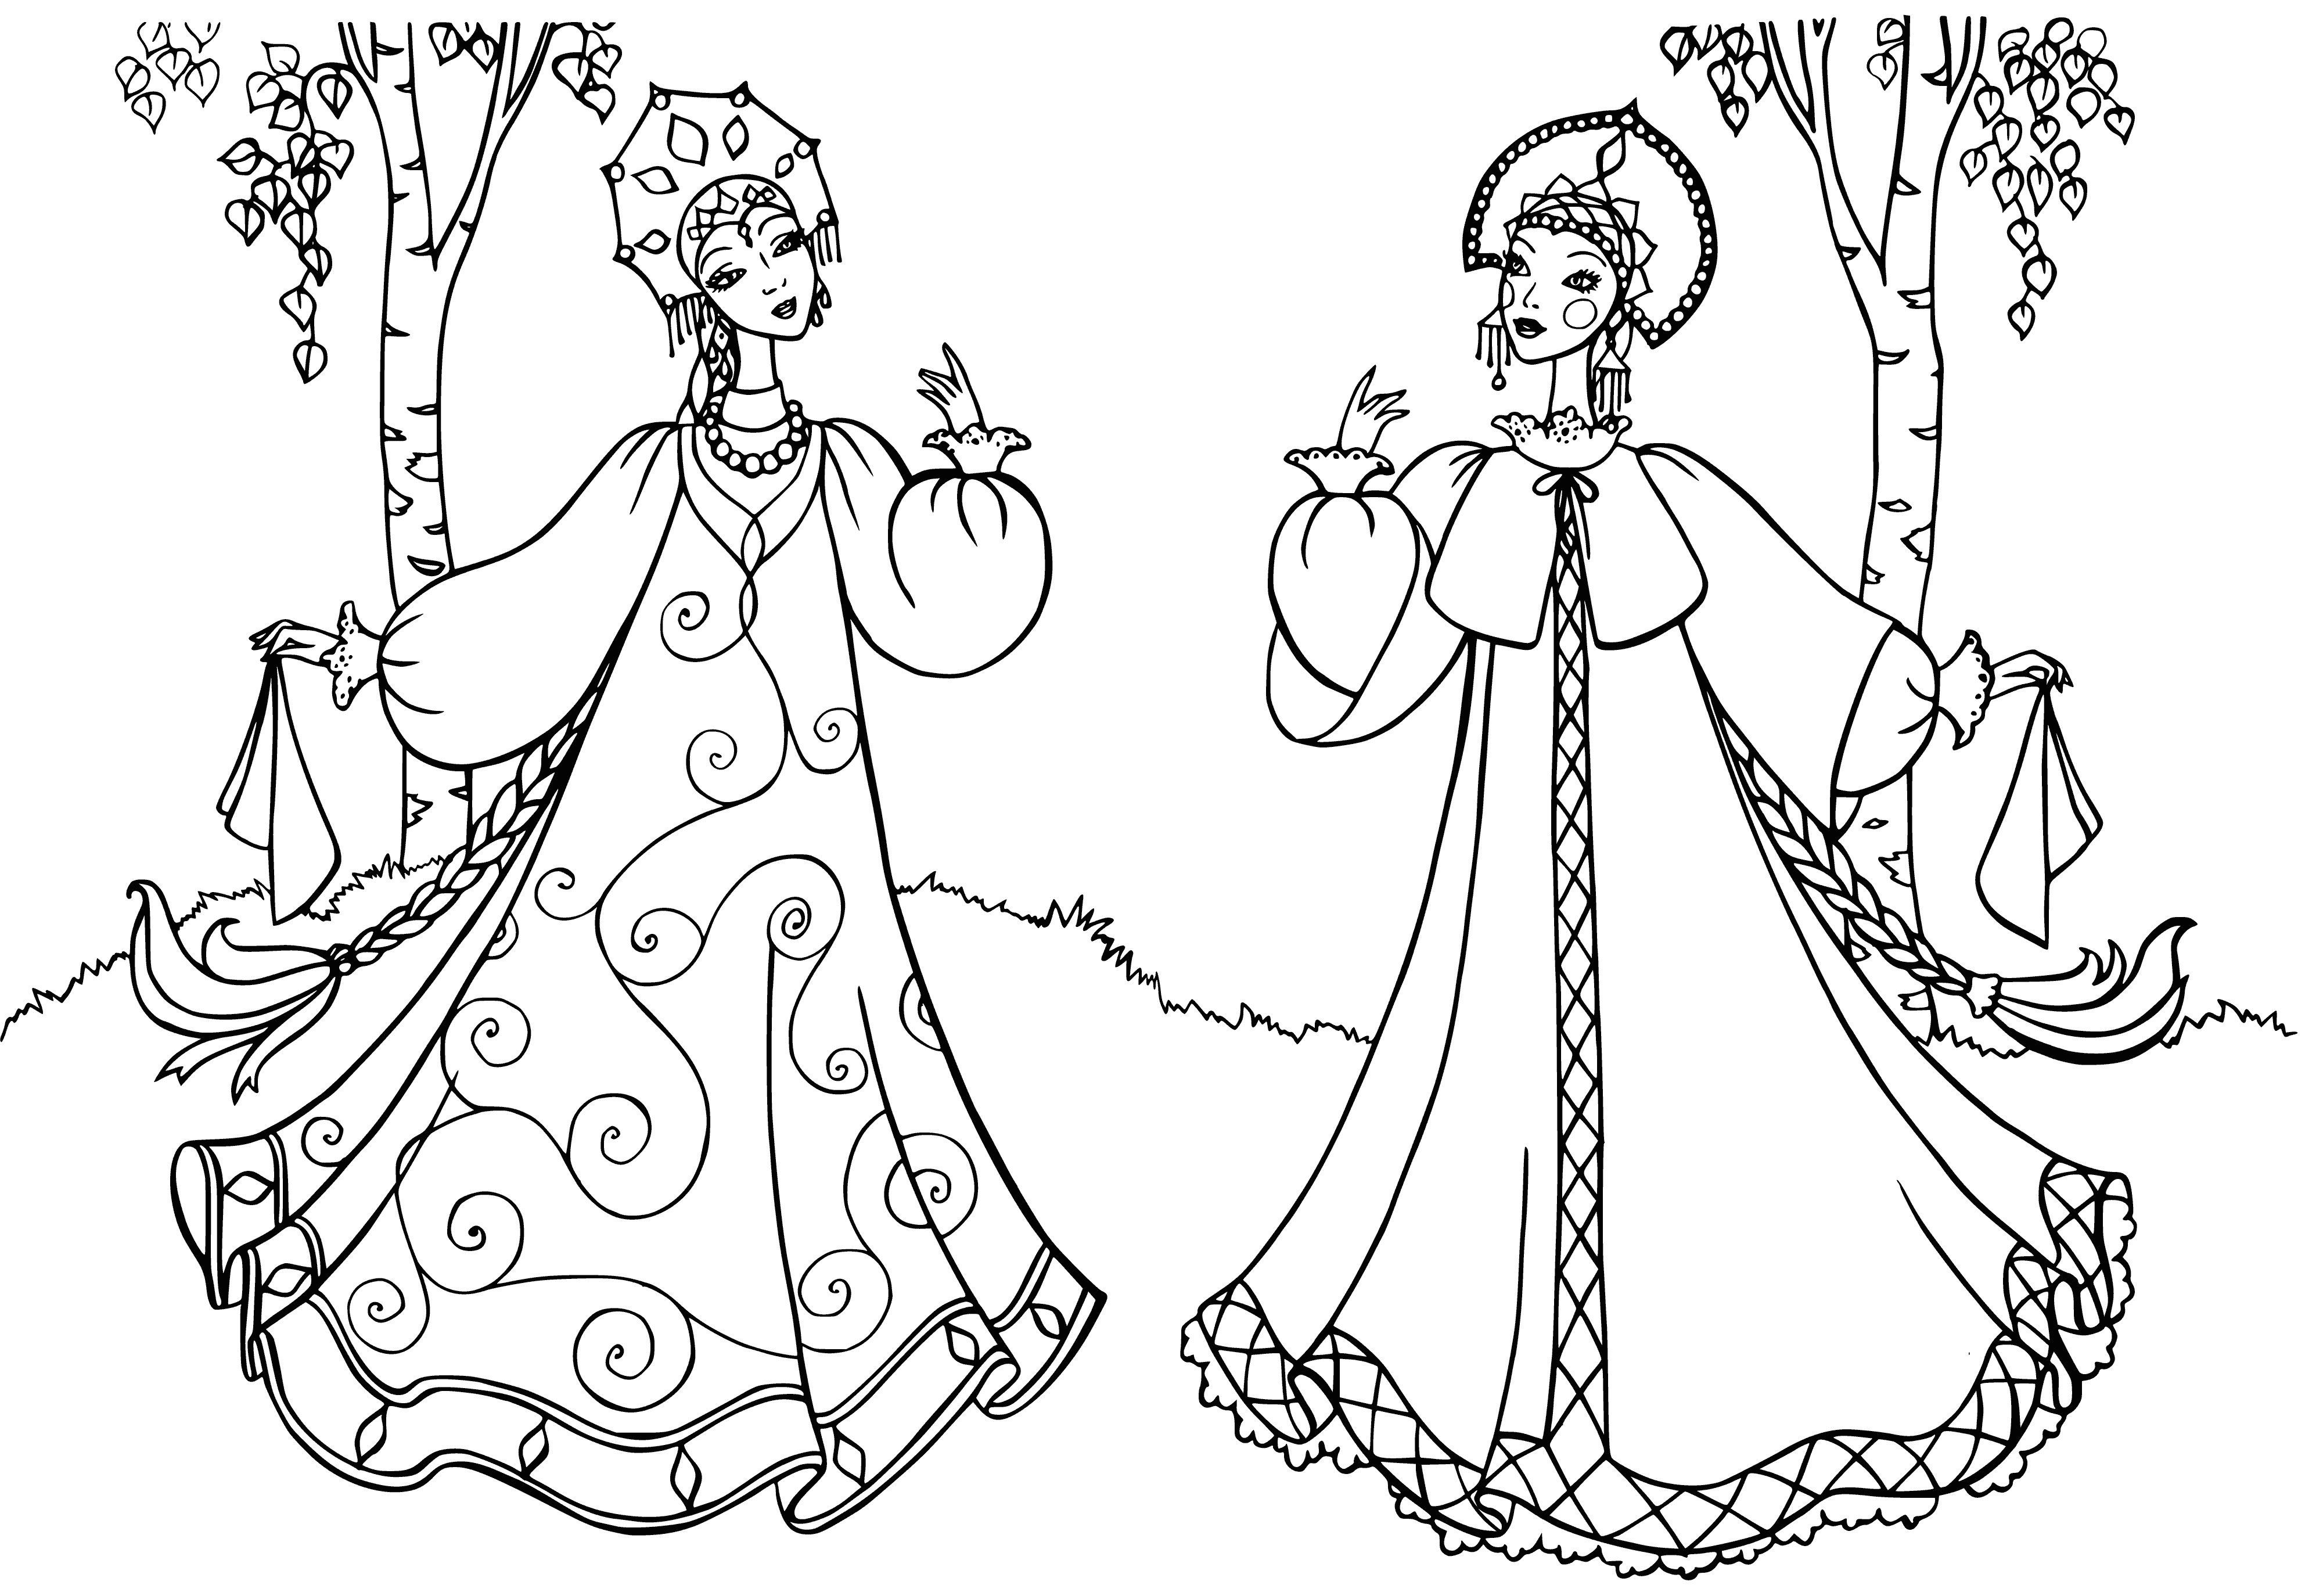 Maidens-beauties coloring page